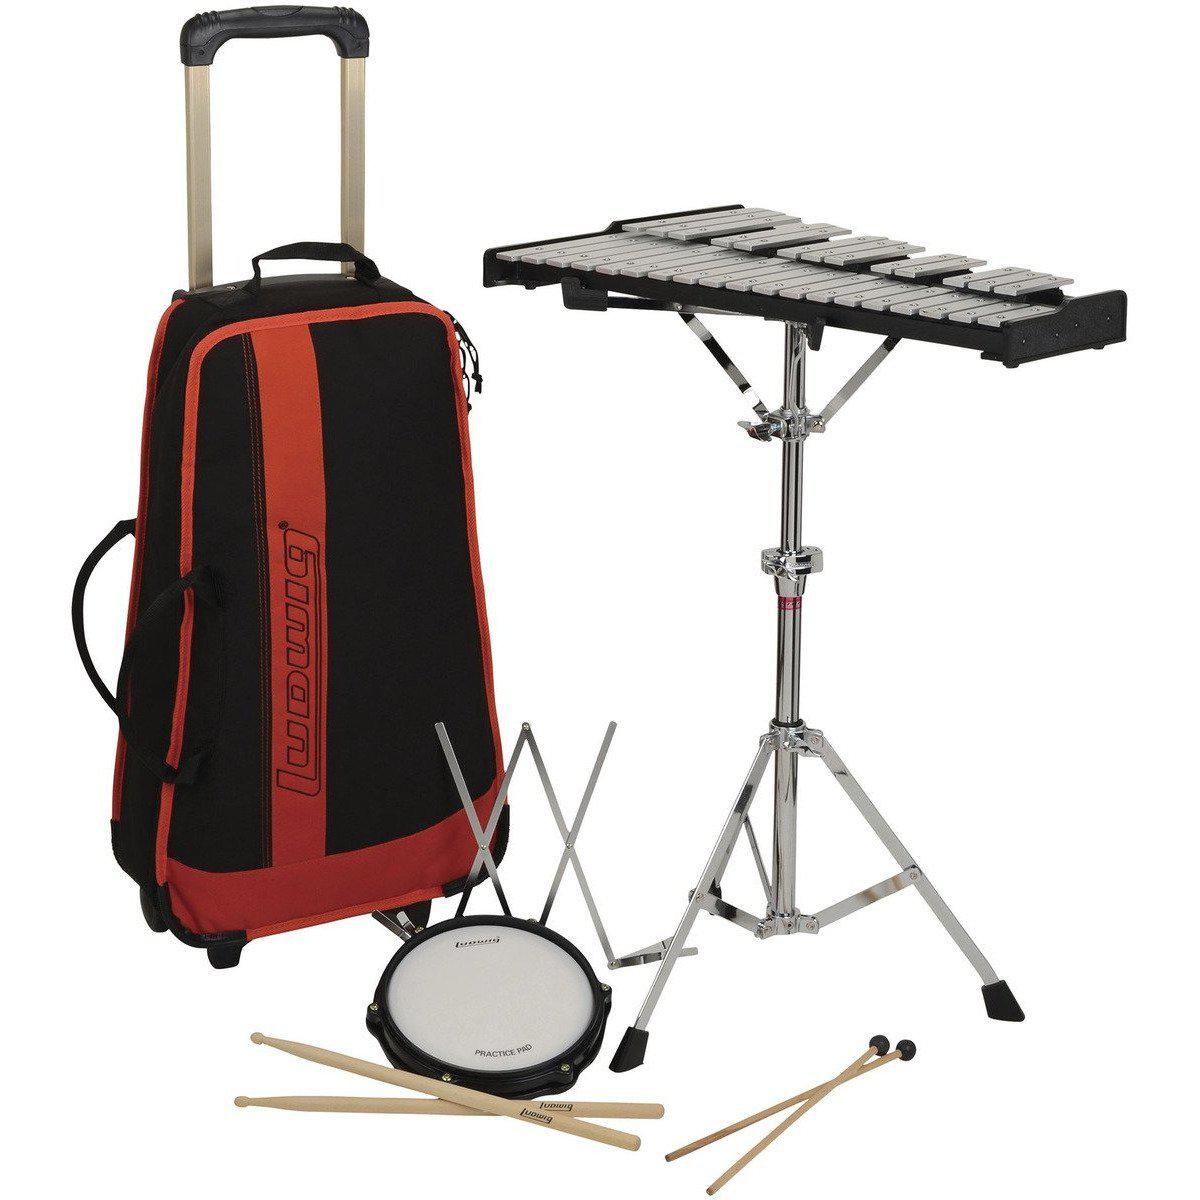 Ludwig M652RP Bell Kit With Rolling Bag Backpack-Andy's Music